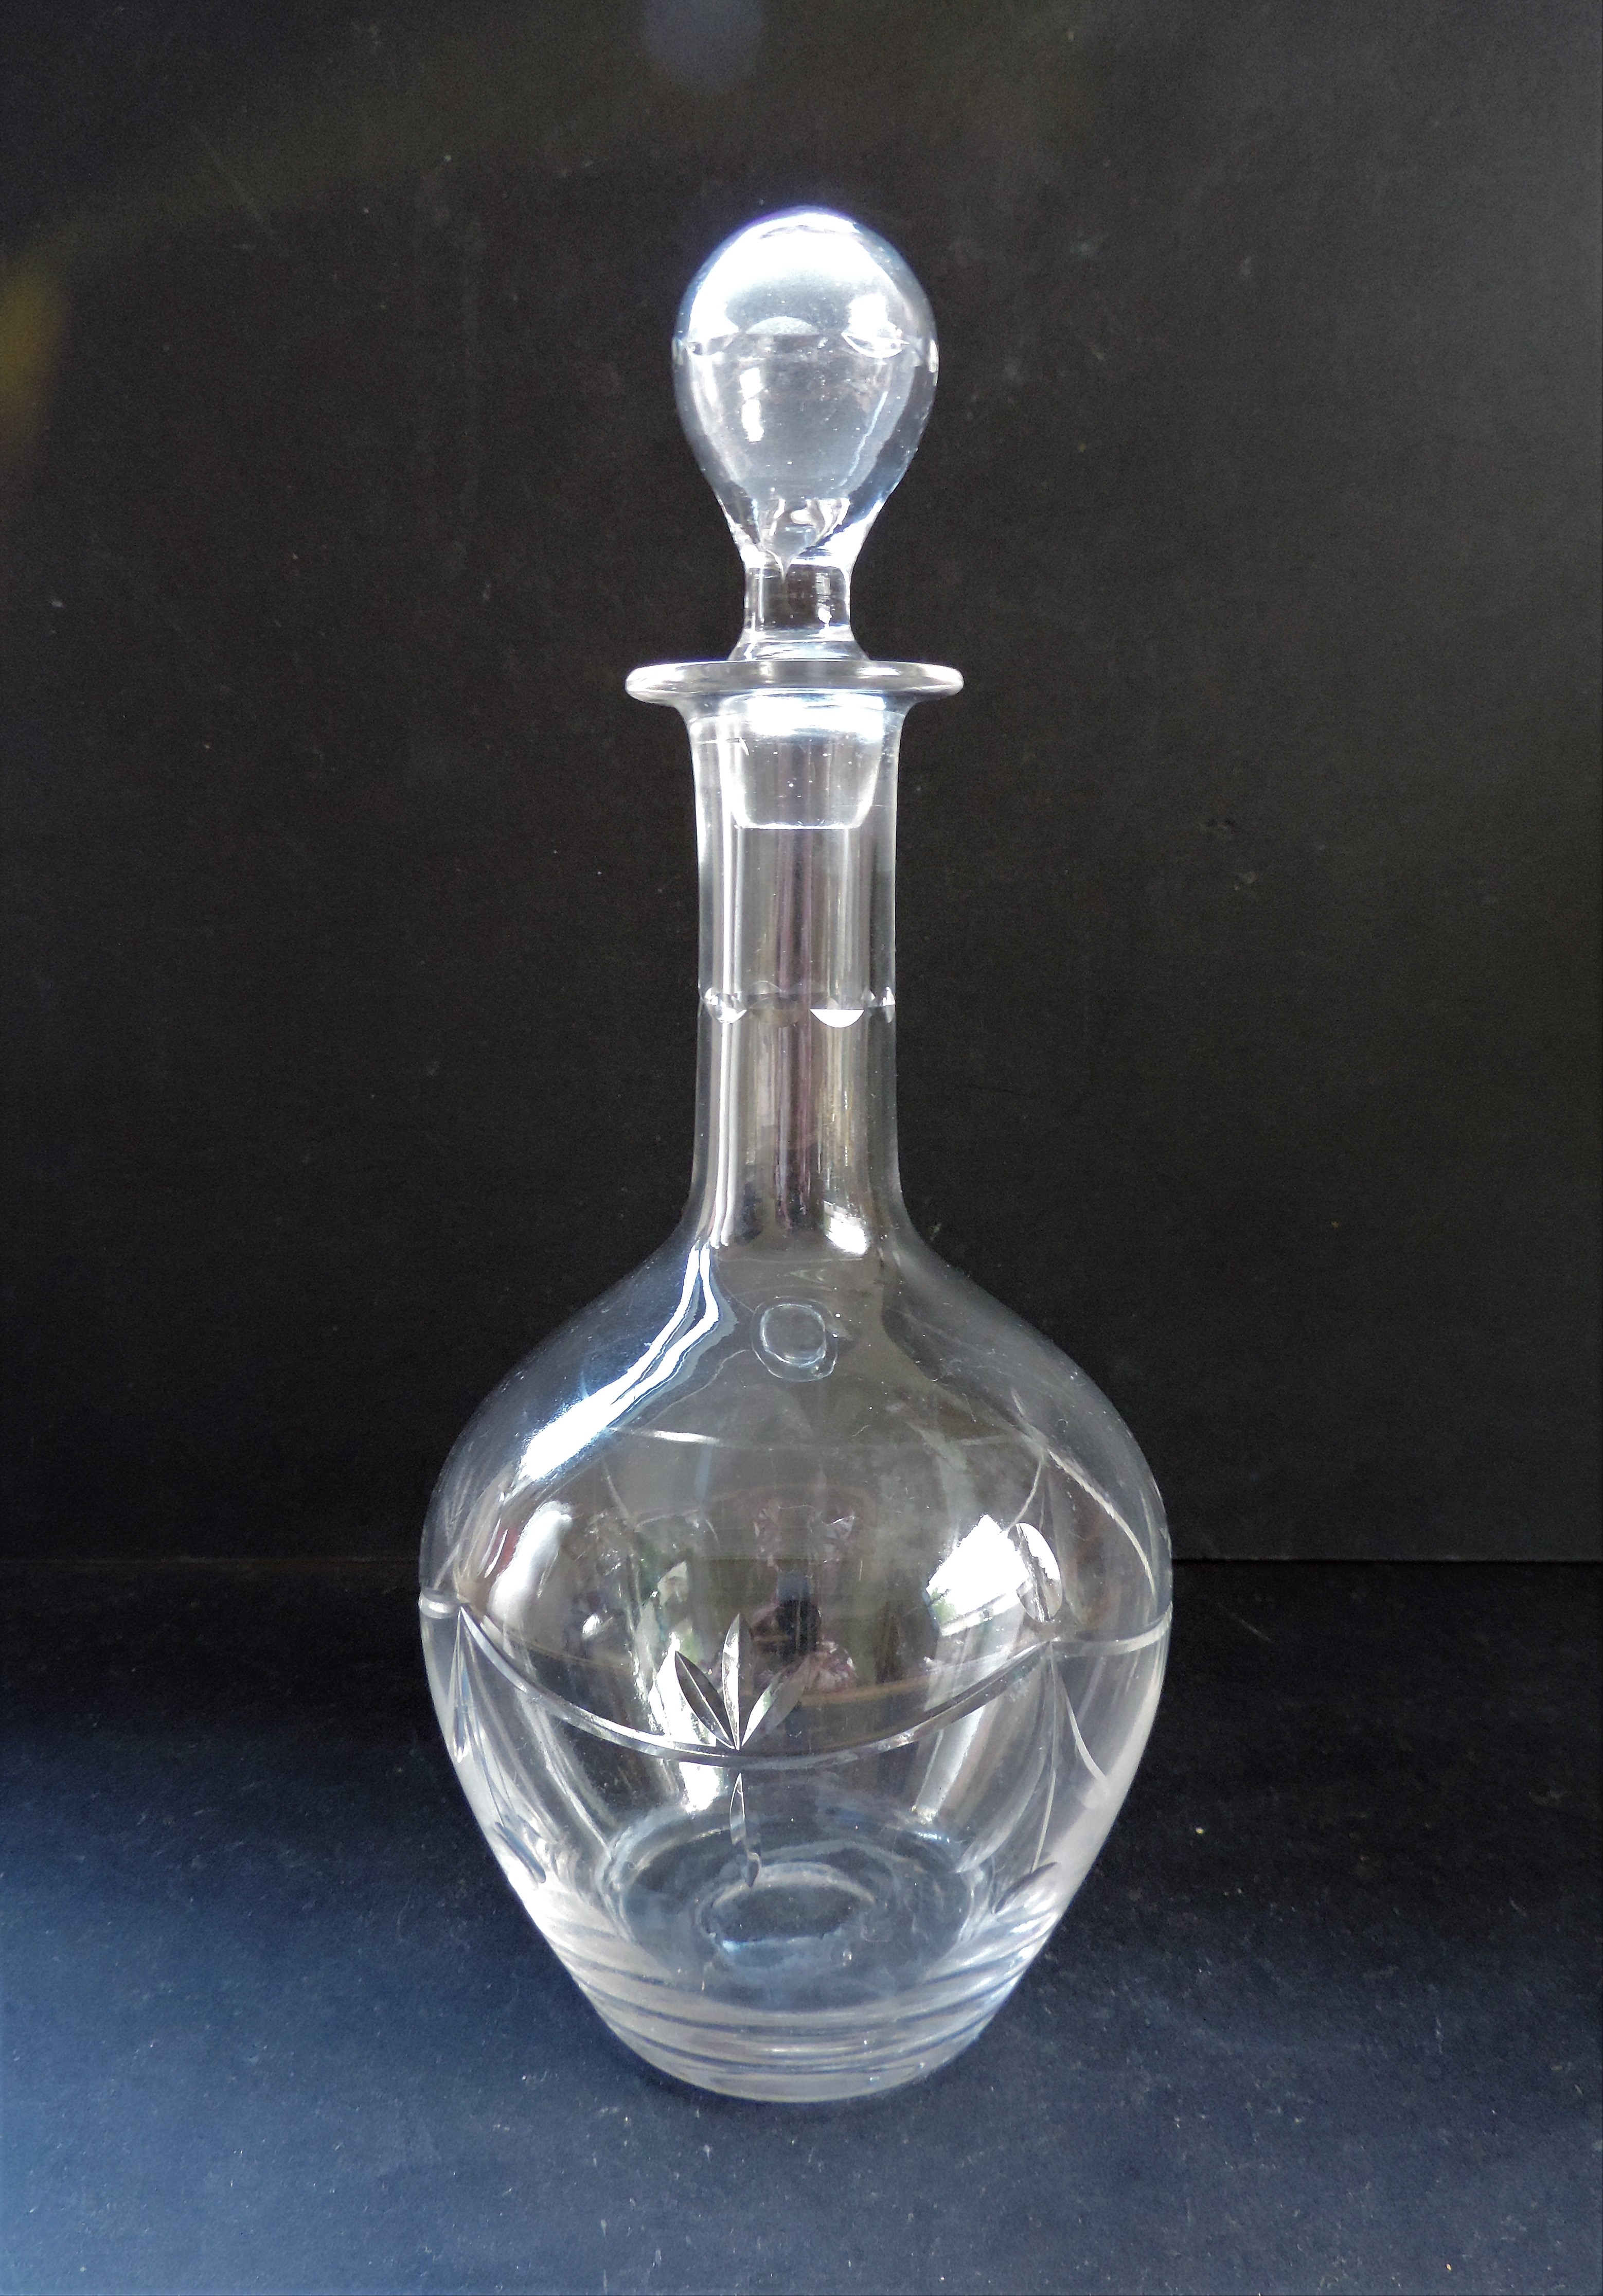 Antique Edwardian Decanter Hollow Stopper - Image 5 of 6